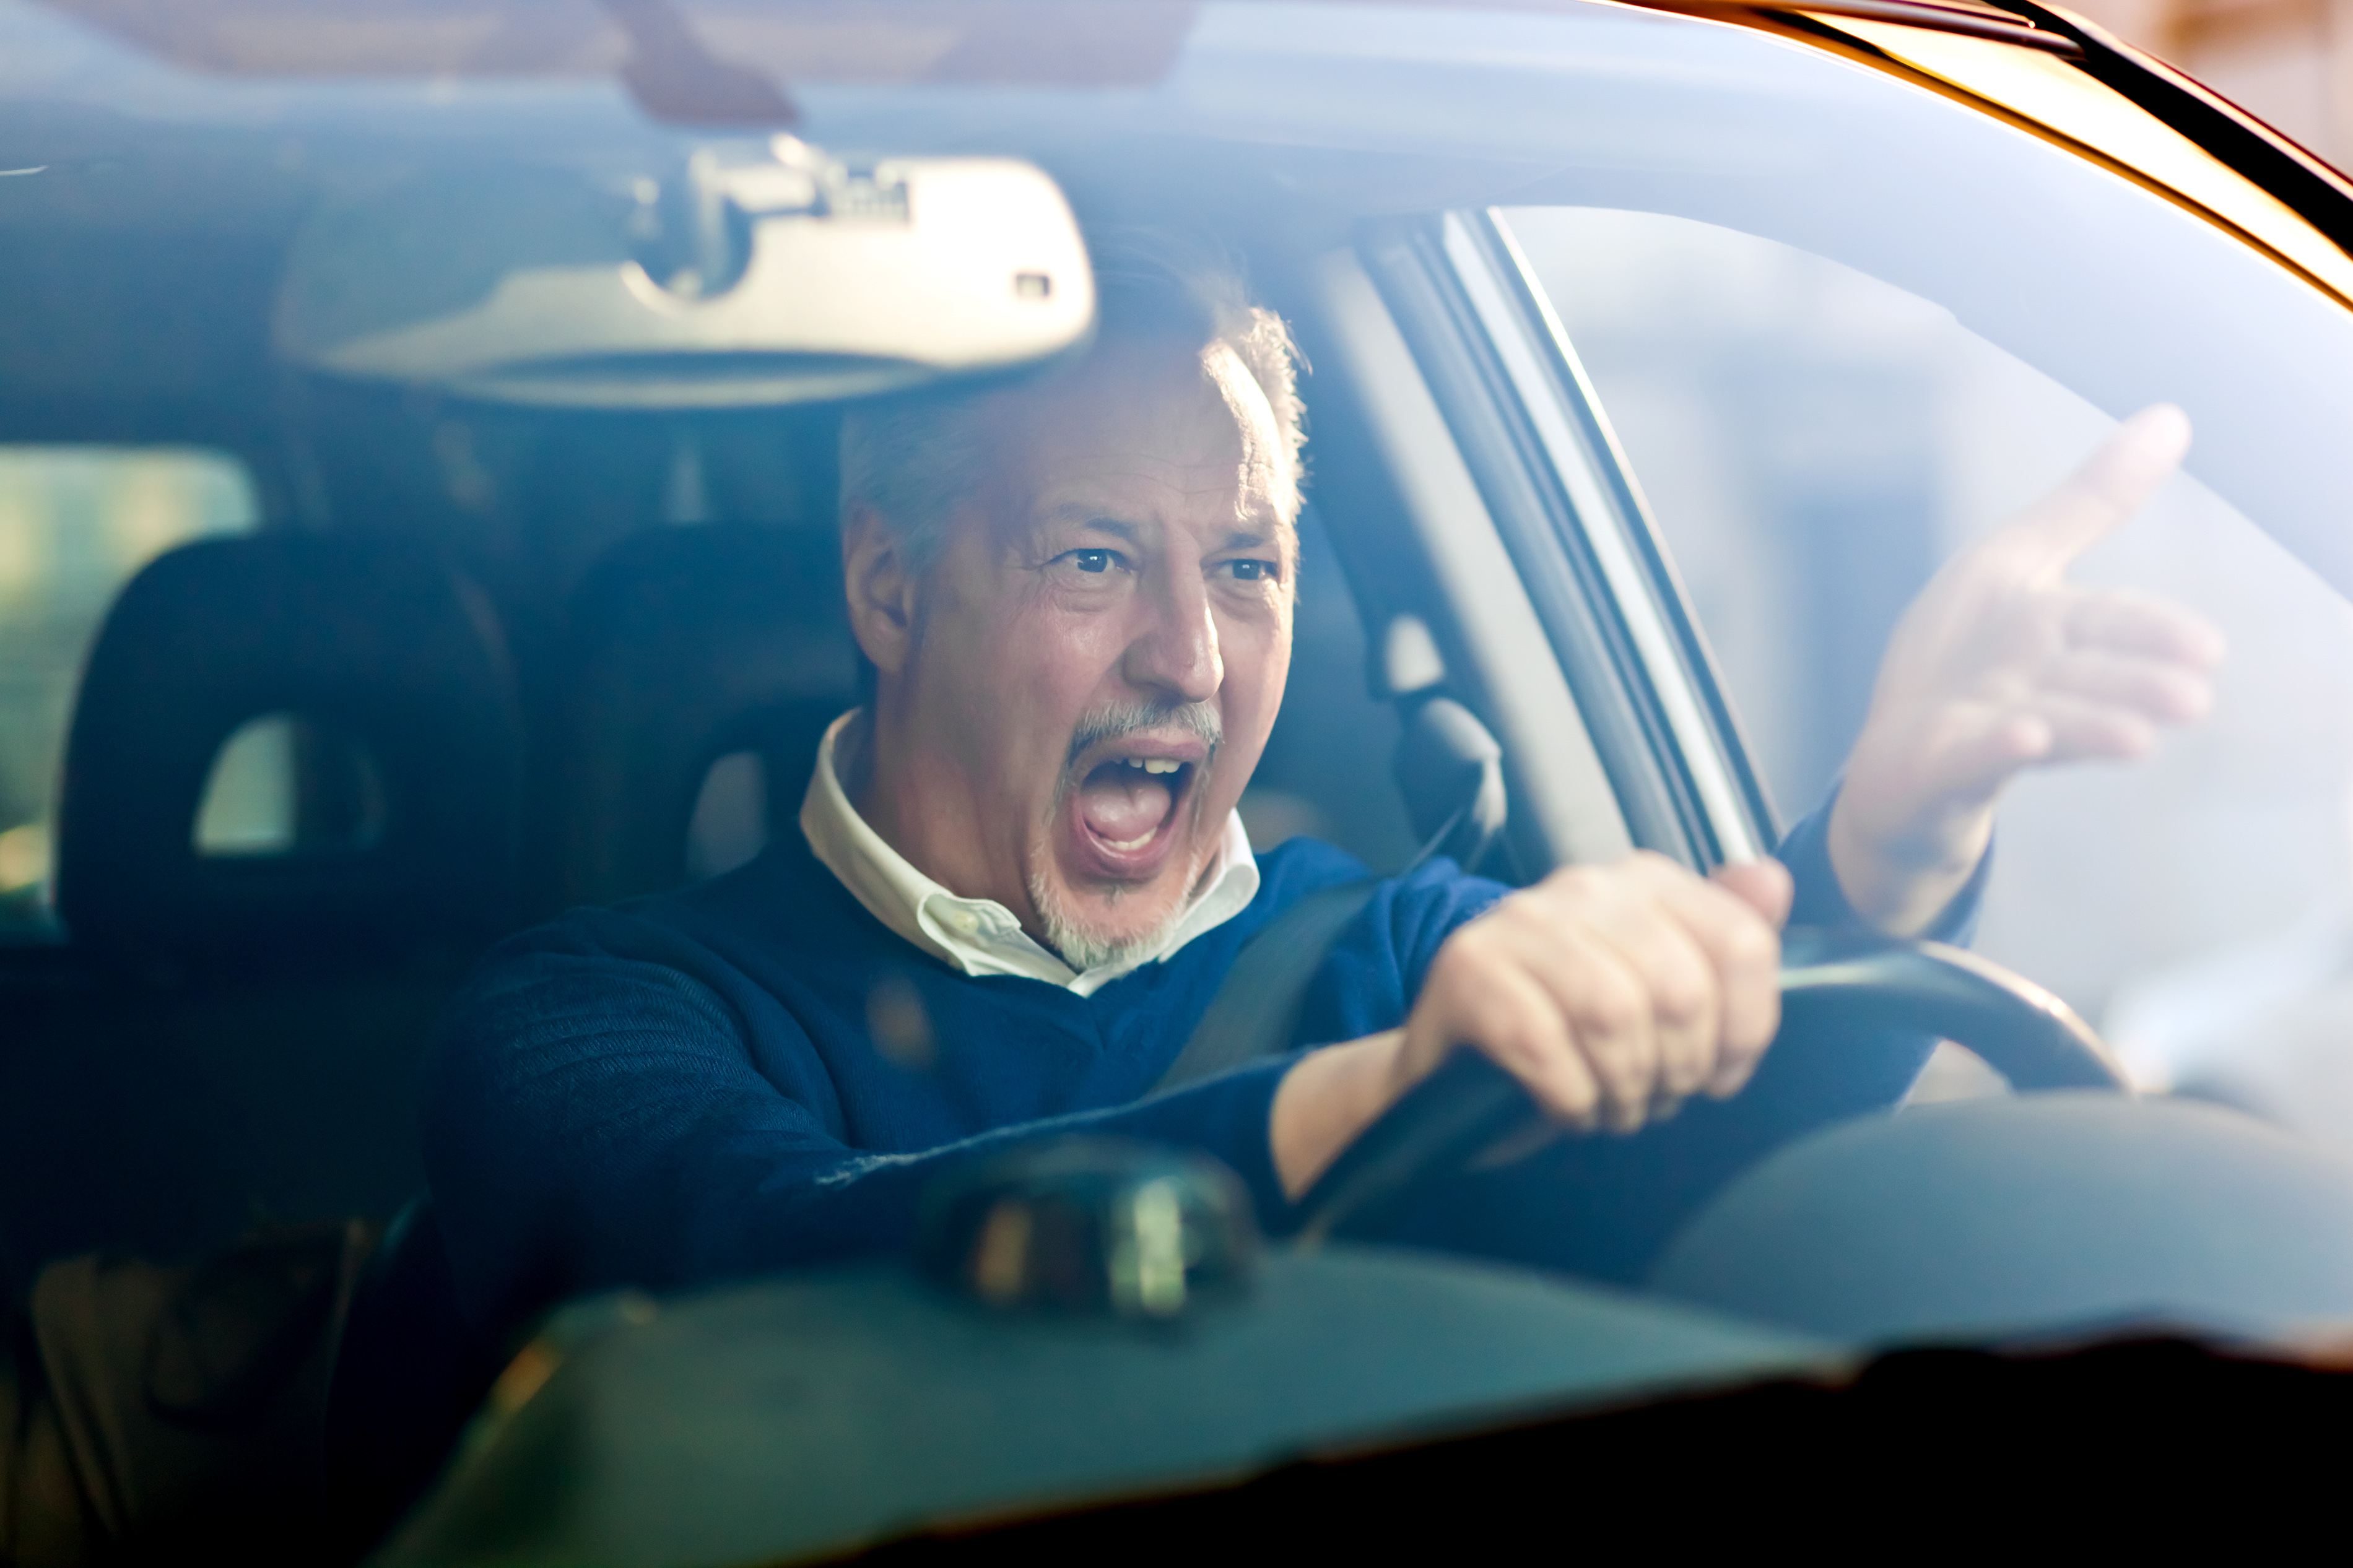 Angry man in a car | Source: Shutterstock